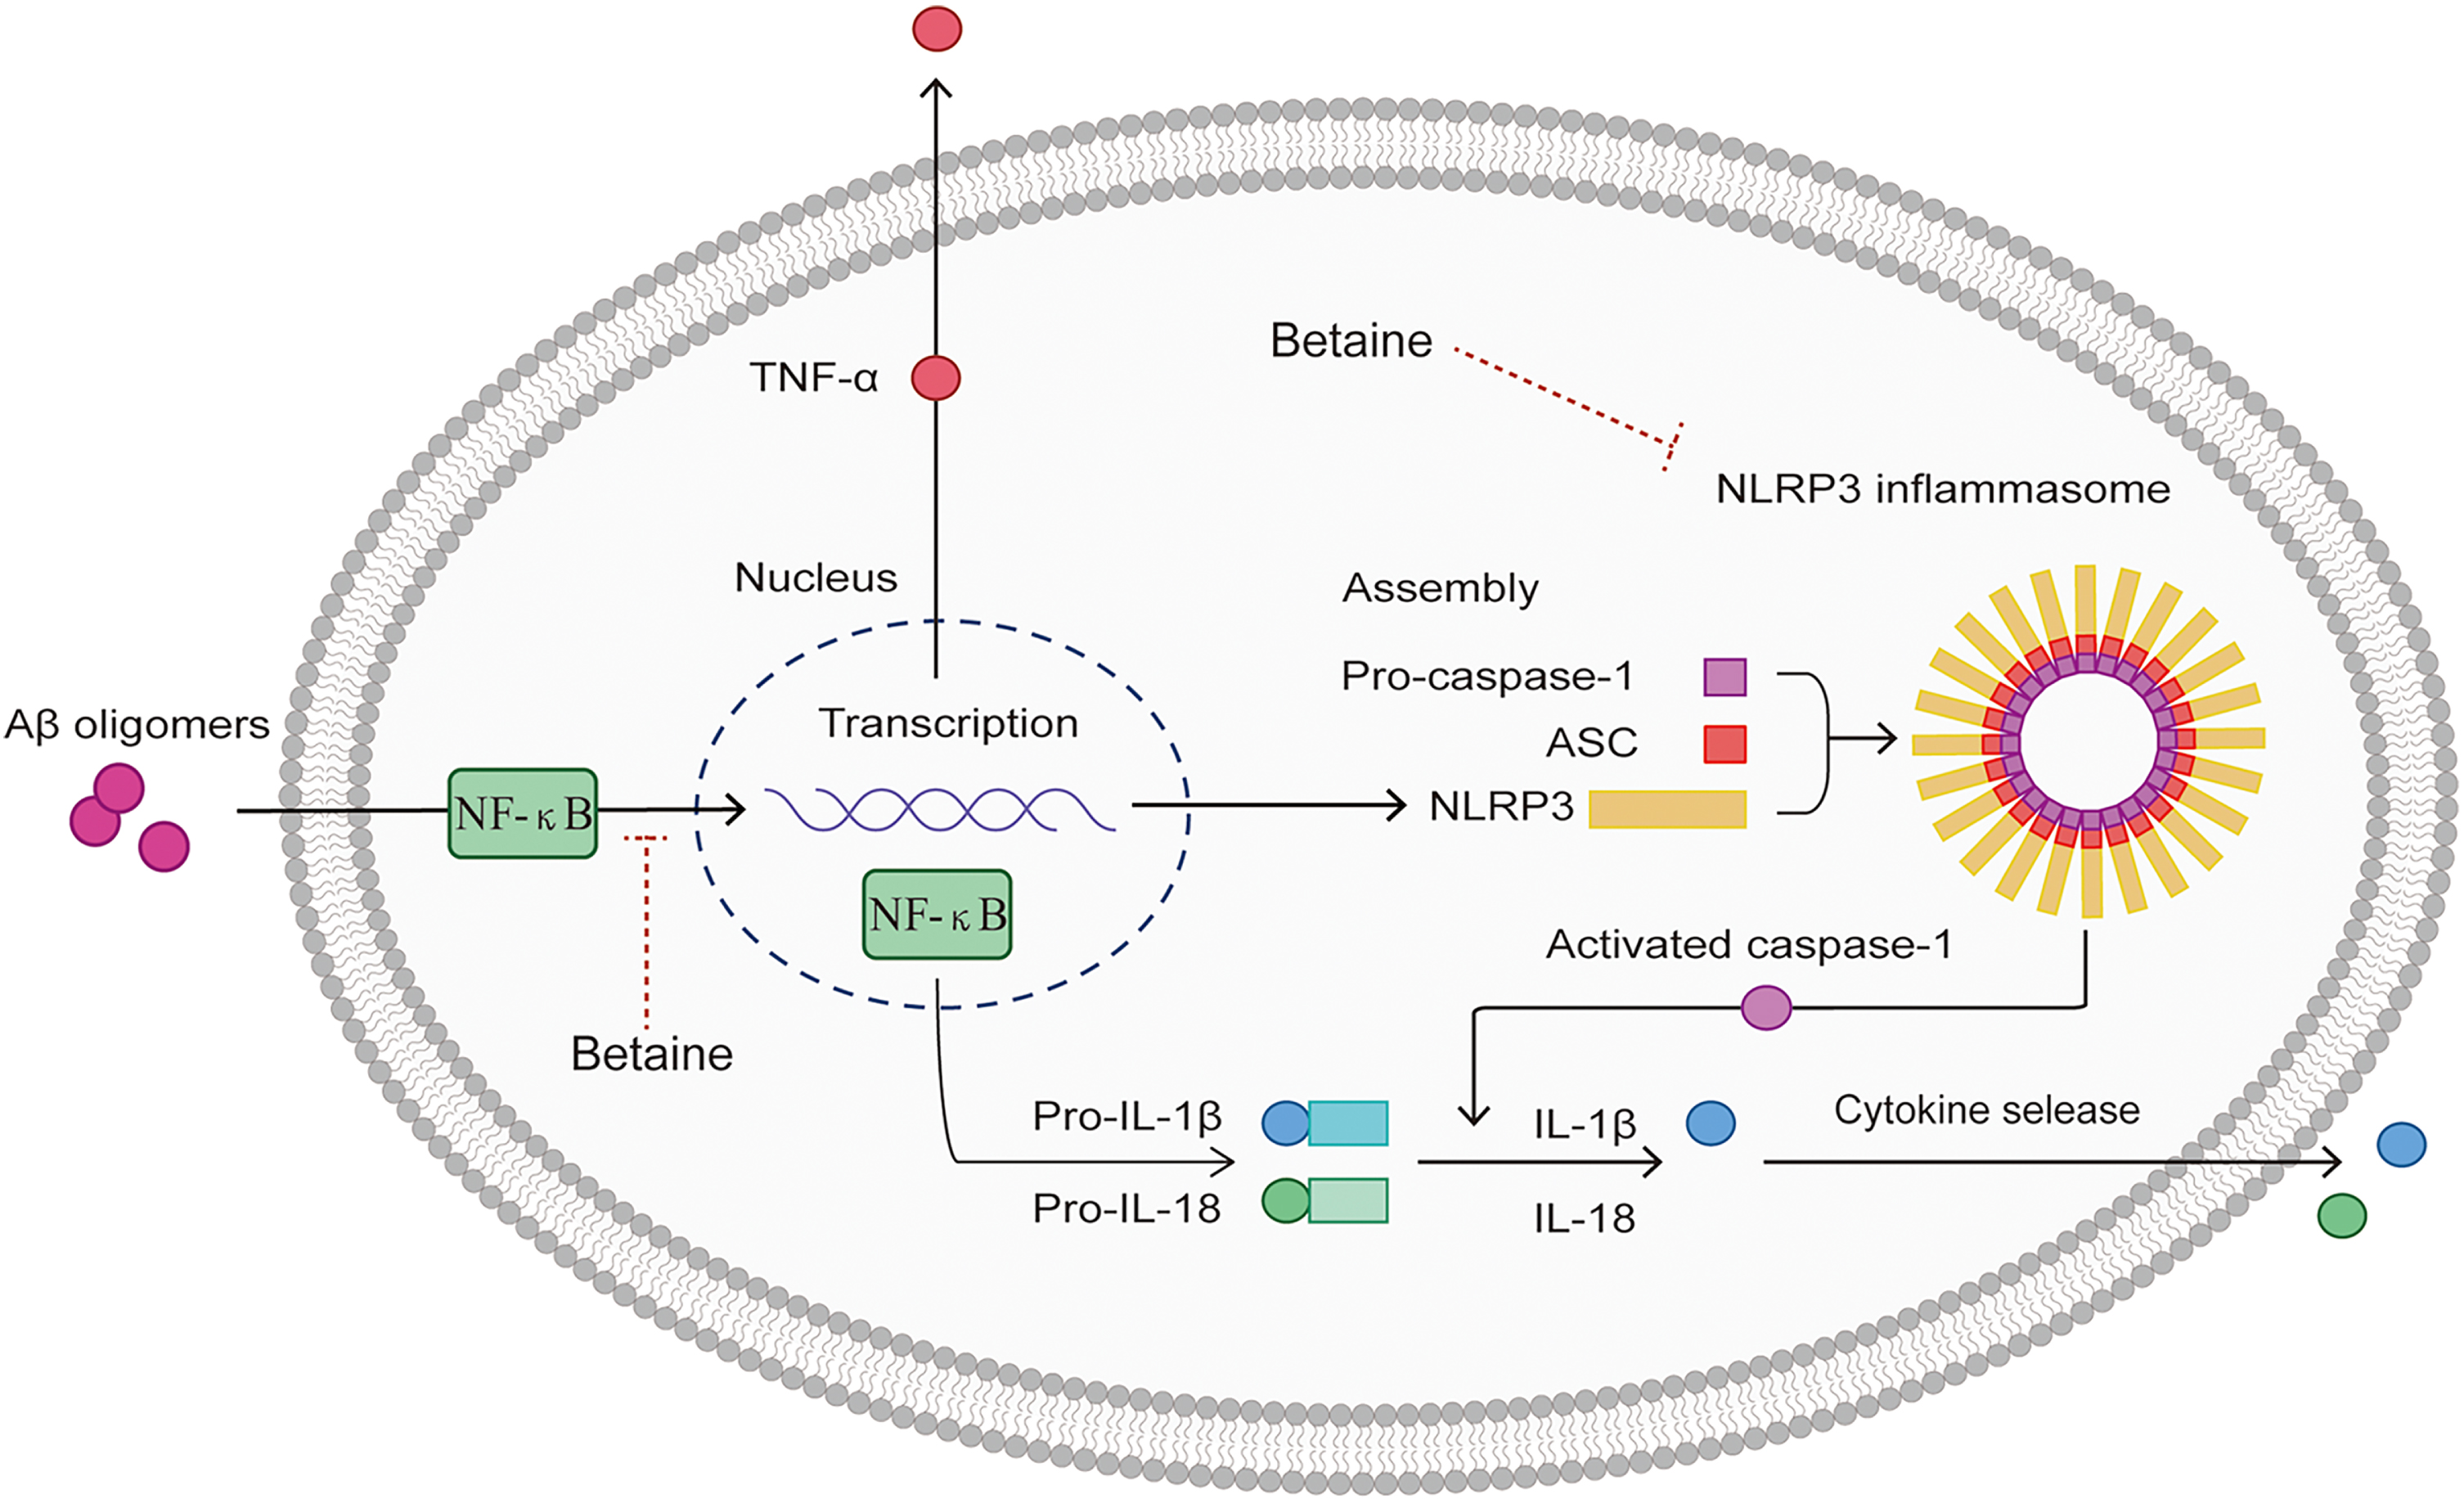 Schematic diagram of the anti-neuroinflammatory mechanisms of betaine. AβO can bind to PRRs on the surface of microglia, promote NF-κB translocation into the nucleus, and trigger NLRP3, TNF-α, pro-IL-1β, and pro-IL-18 transcription and expression, which promotes NLRP3 inflammasome activation. The NLRP3 inflammasome then interacts with ASC to induce caspase-1 cleavage and maturation. Betaine simultaneously inhibits NF-κB and NLRP3 to exert anti-neuroinflammatory effects and reduce the production of IL-1β and IL-18 in microglial cells.